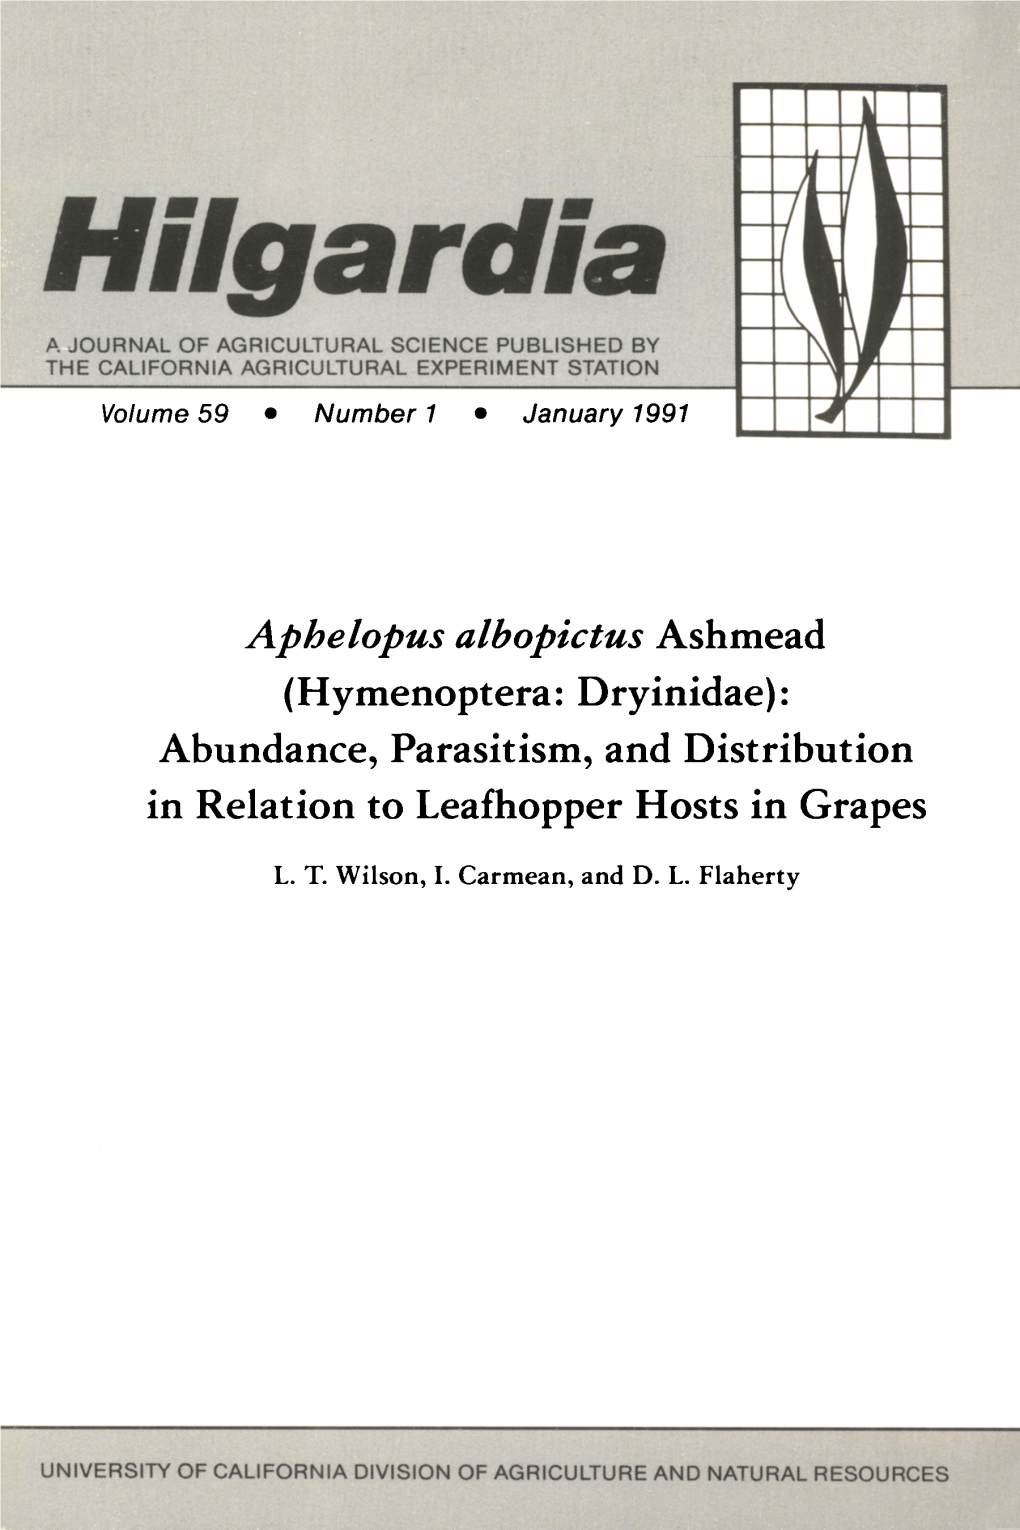 Hilgardia a JOURNAL of AGRICULTURAL SCIENCE PUBLISHED by the CALIFORNIA AGRICULTURAL EXPERIMENT STATION Volume 59 • Number 1 • January 1991